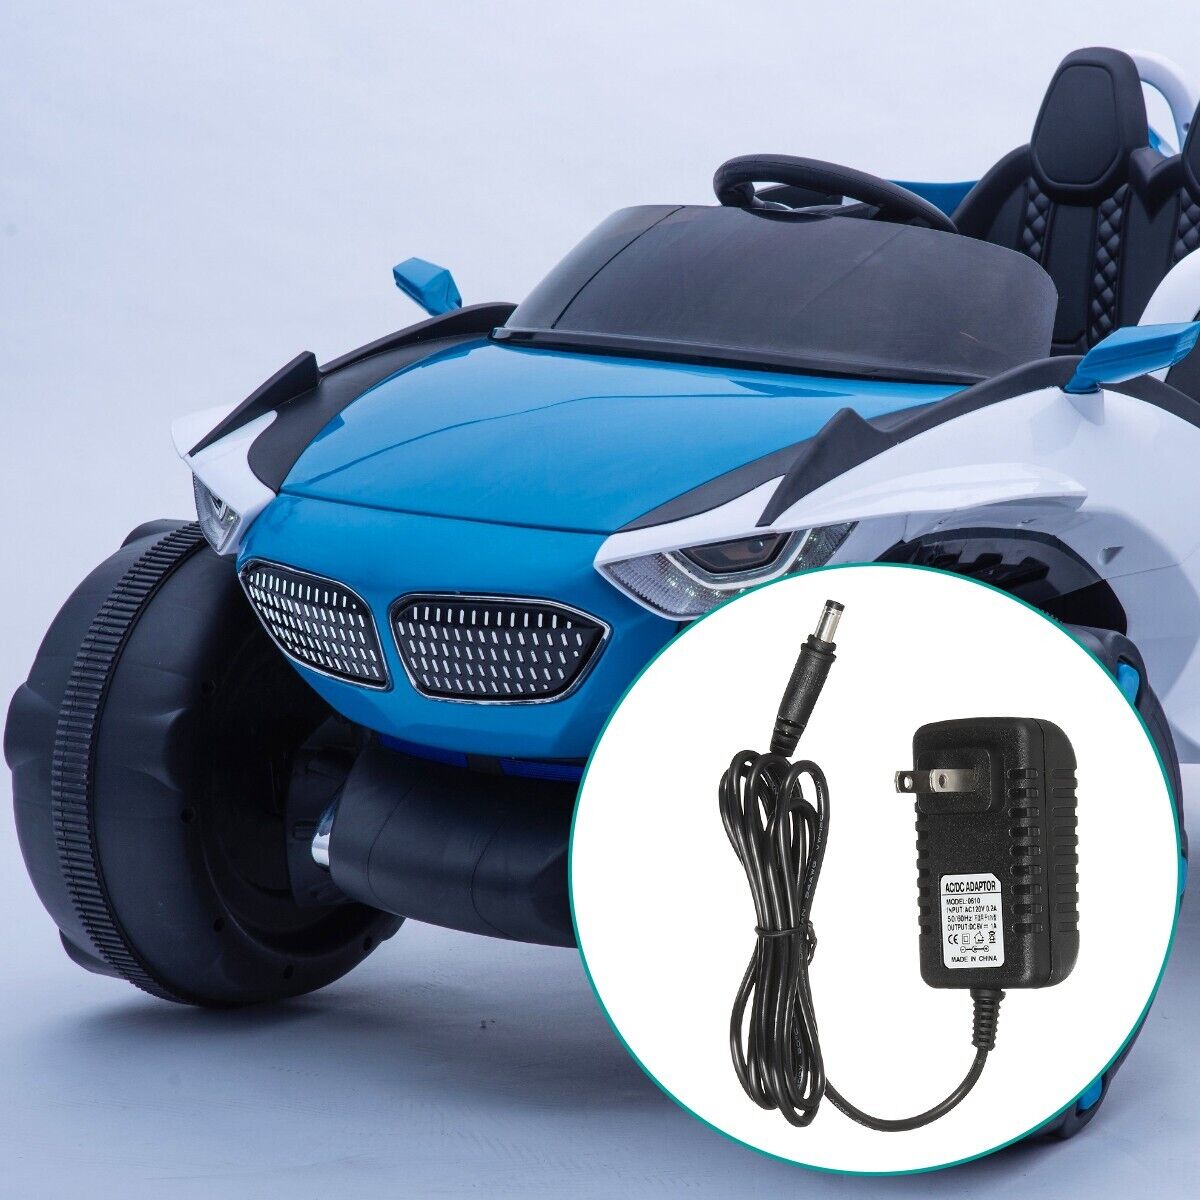 6 Volt Battery Charger for Kids Powered Ride On Car Best Choice Product Kid Trax Unbranded Does Not Apply - фотография #7